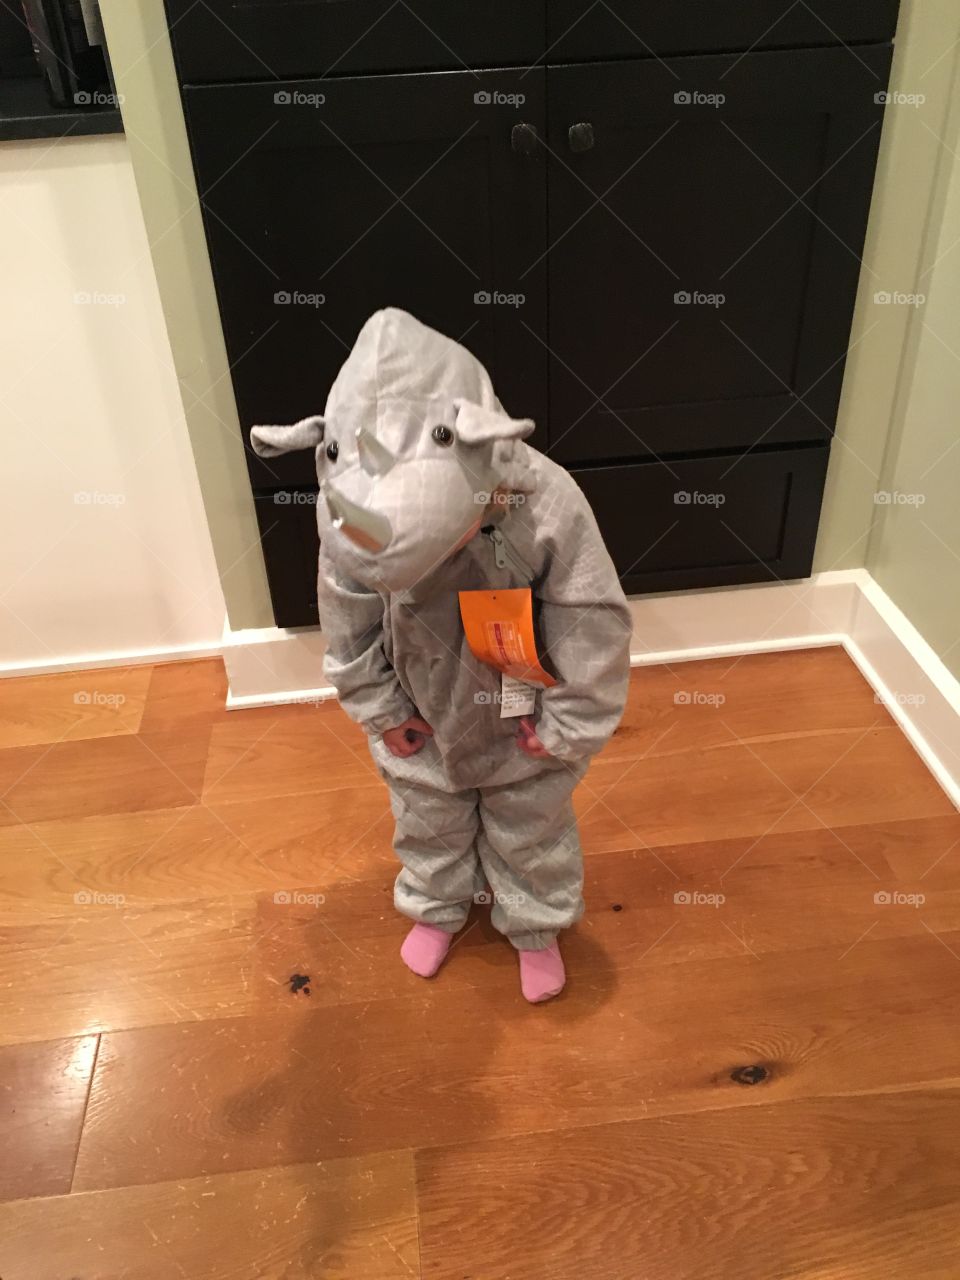 Rhino Halloween costume being modeled by my 2 year old little girl getting ready for Halloween 